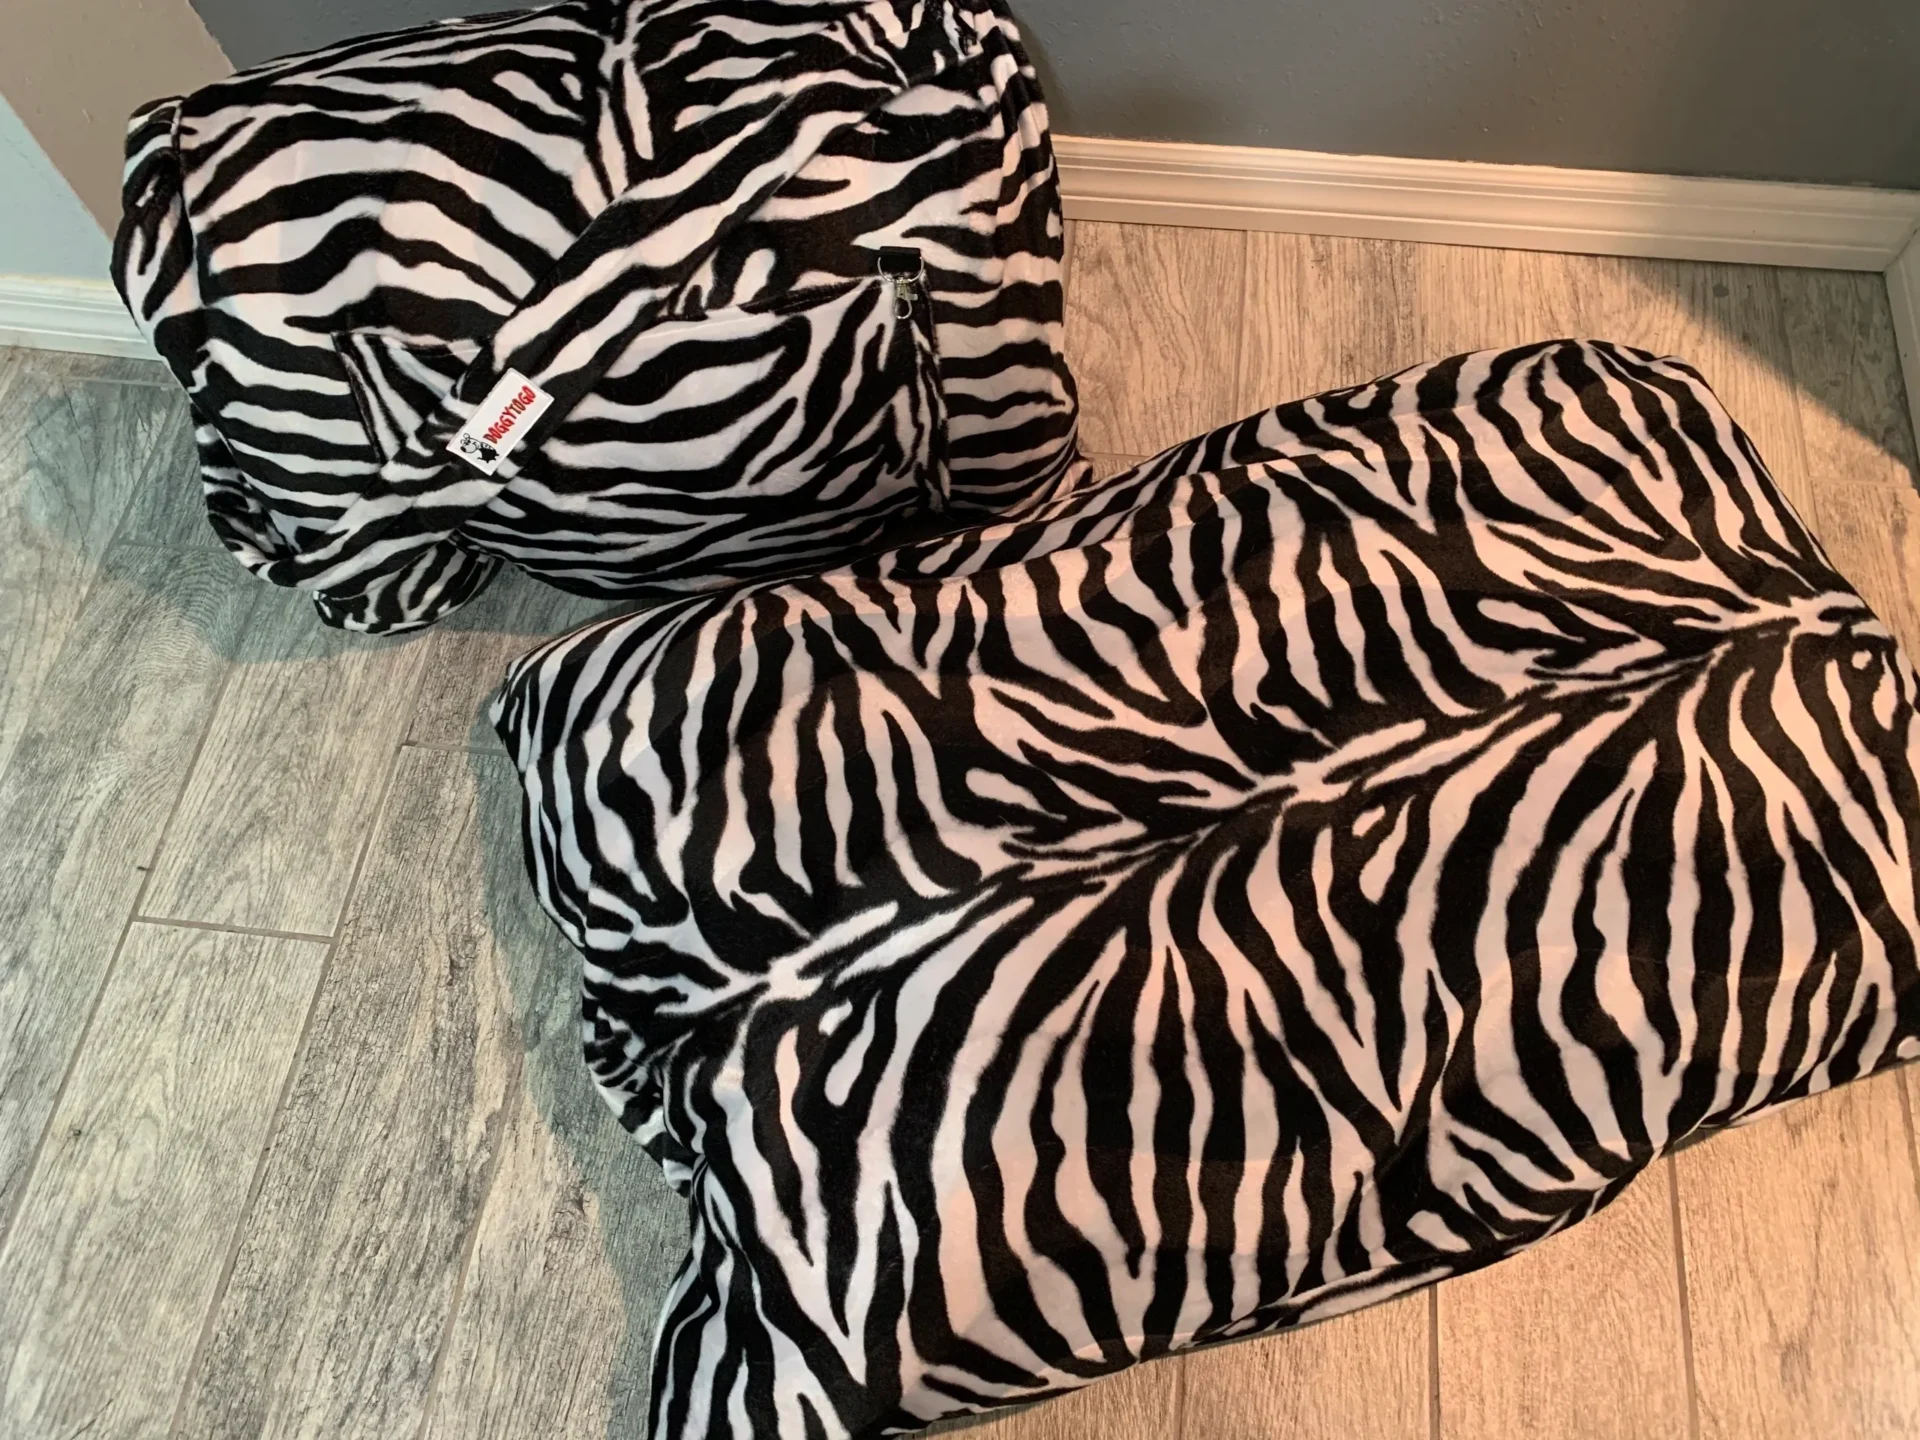 Two dog bed bags with white and black patterns lying down on the floor